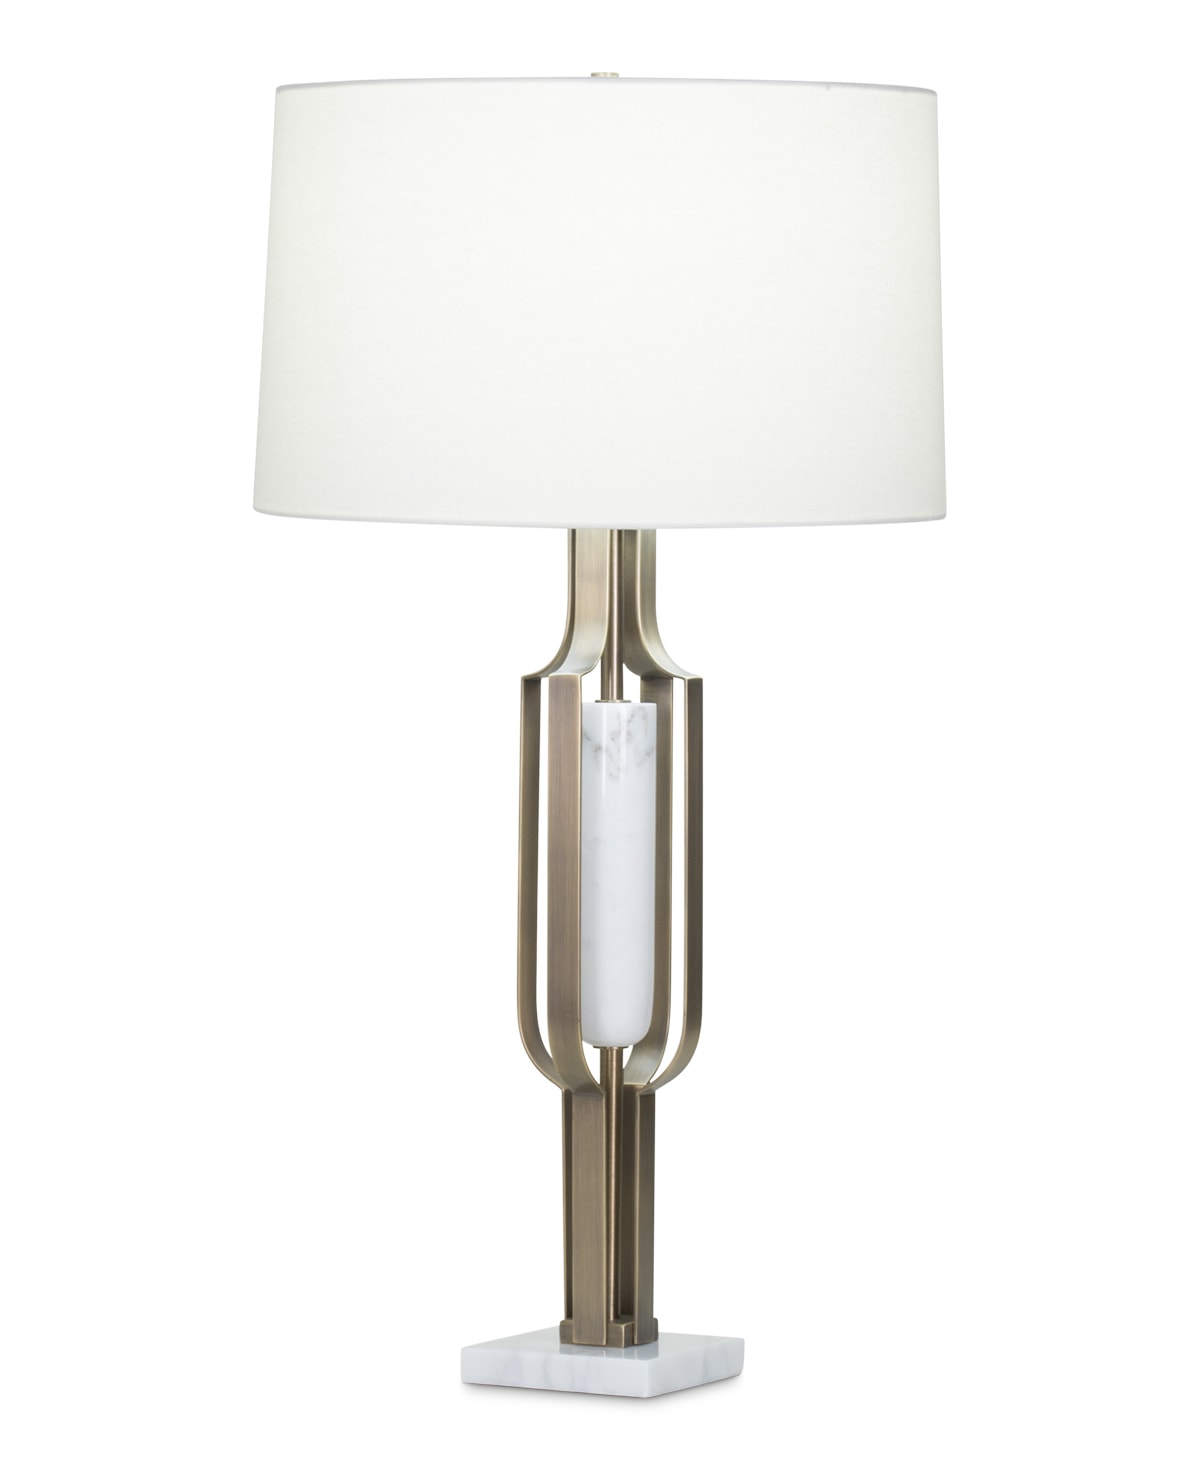 FlowDecor Homer Table Lamp in white marble and metal with antique brass finish and off-white linen tapered drum shade (# 4043)